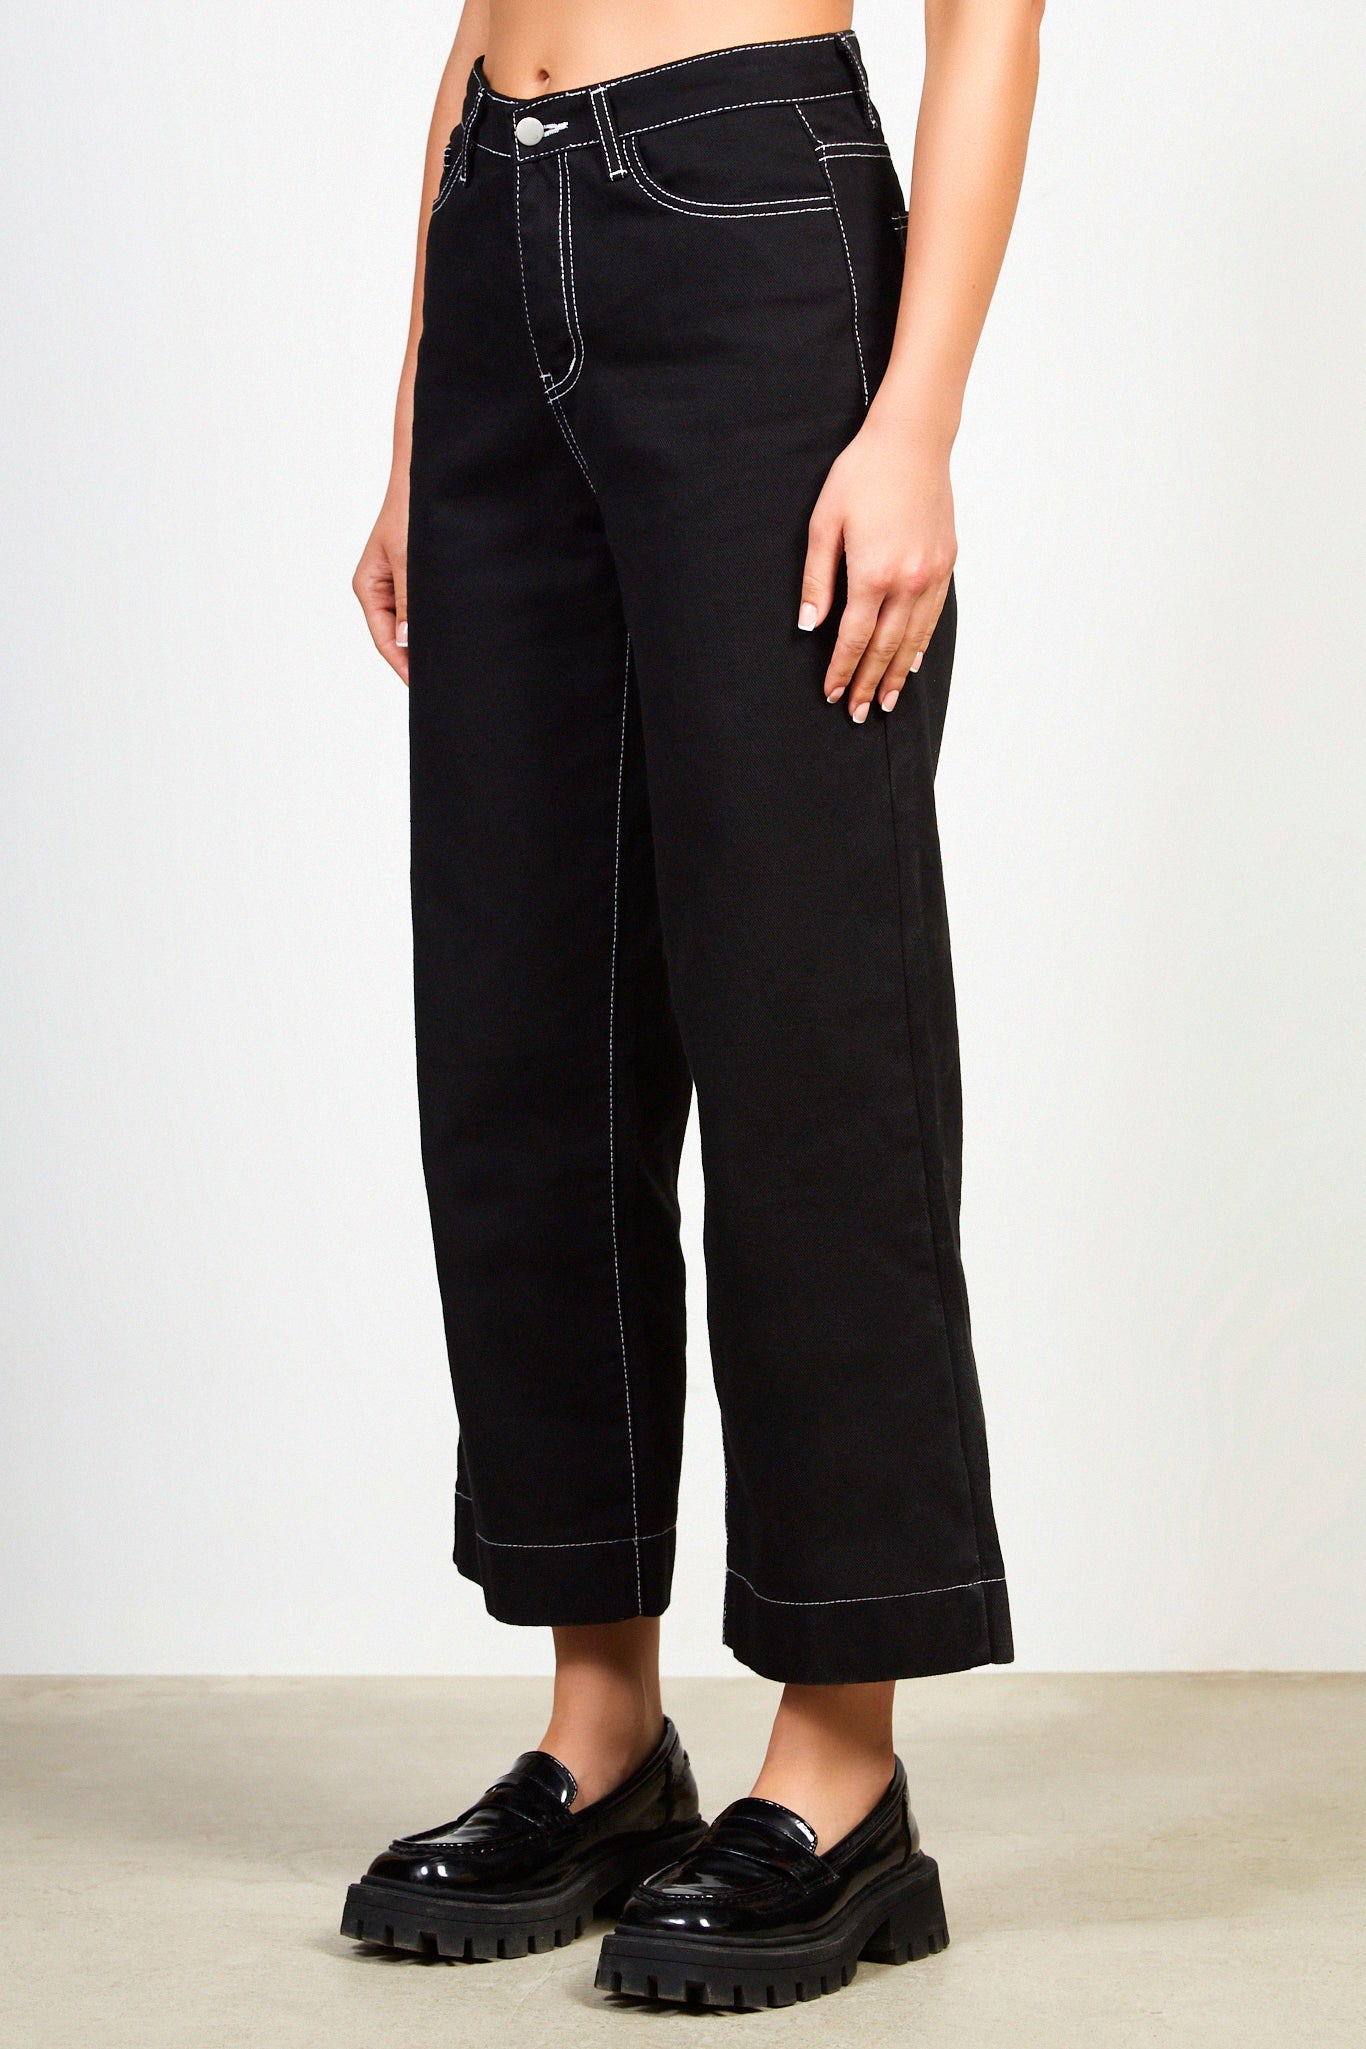 Black and white wide leg contrast stitch jeans